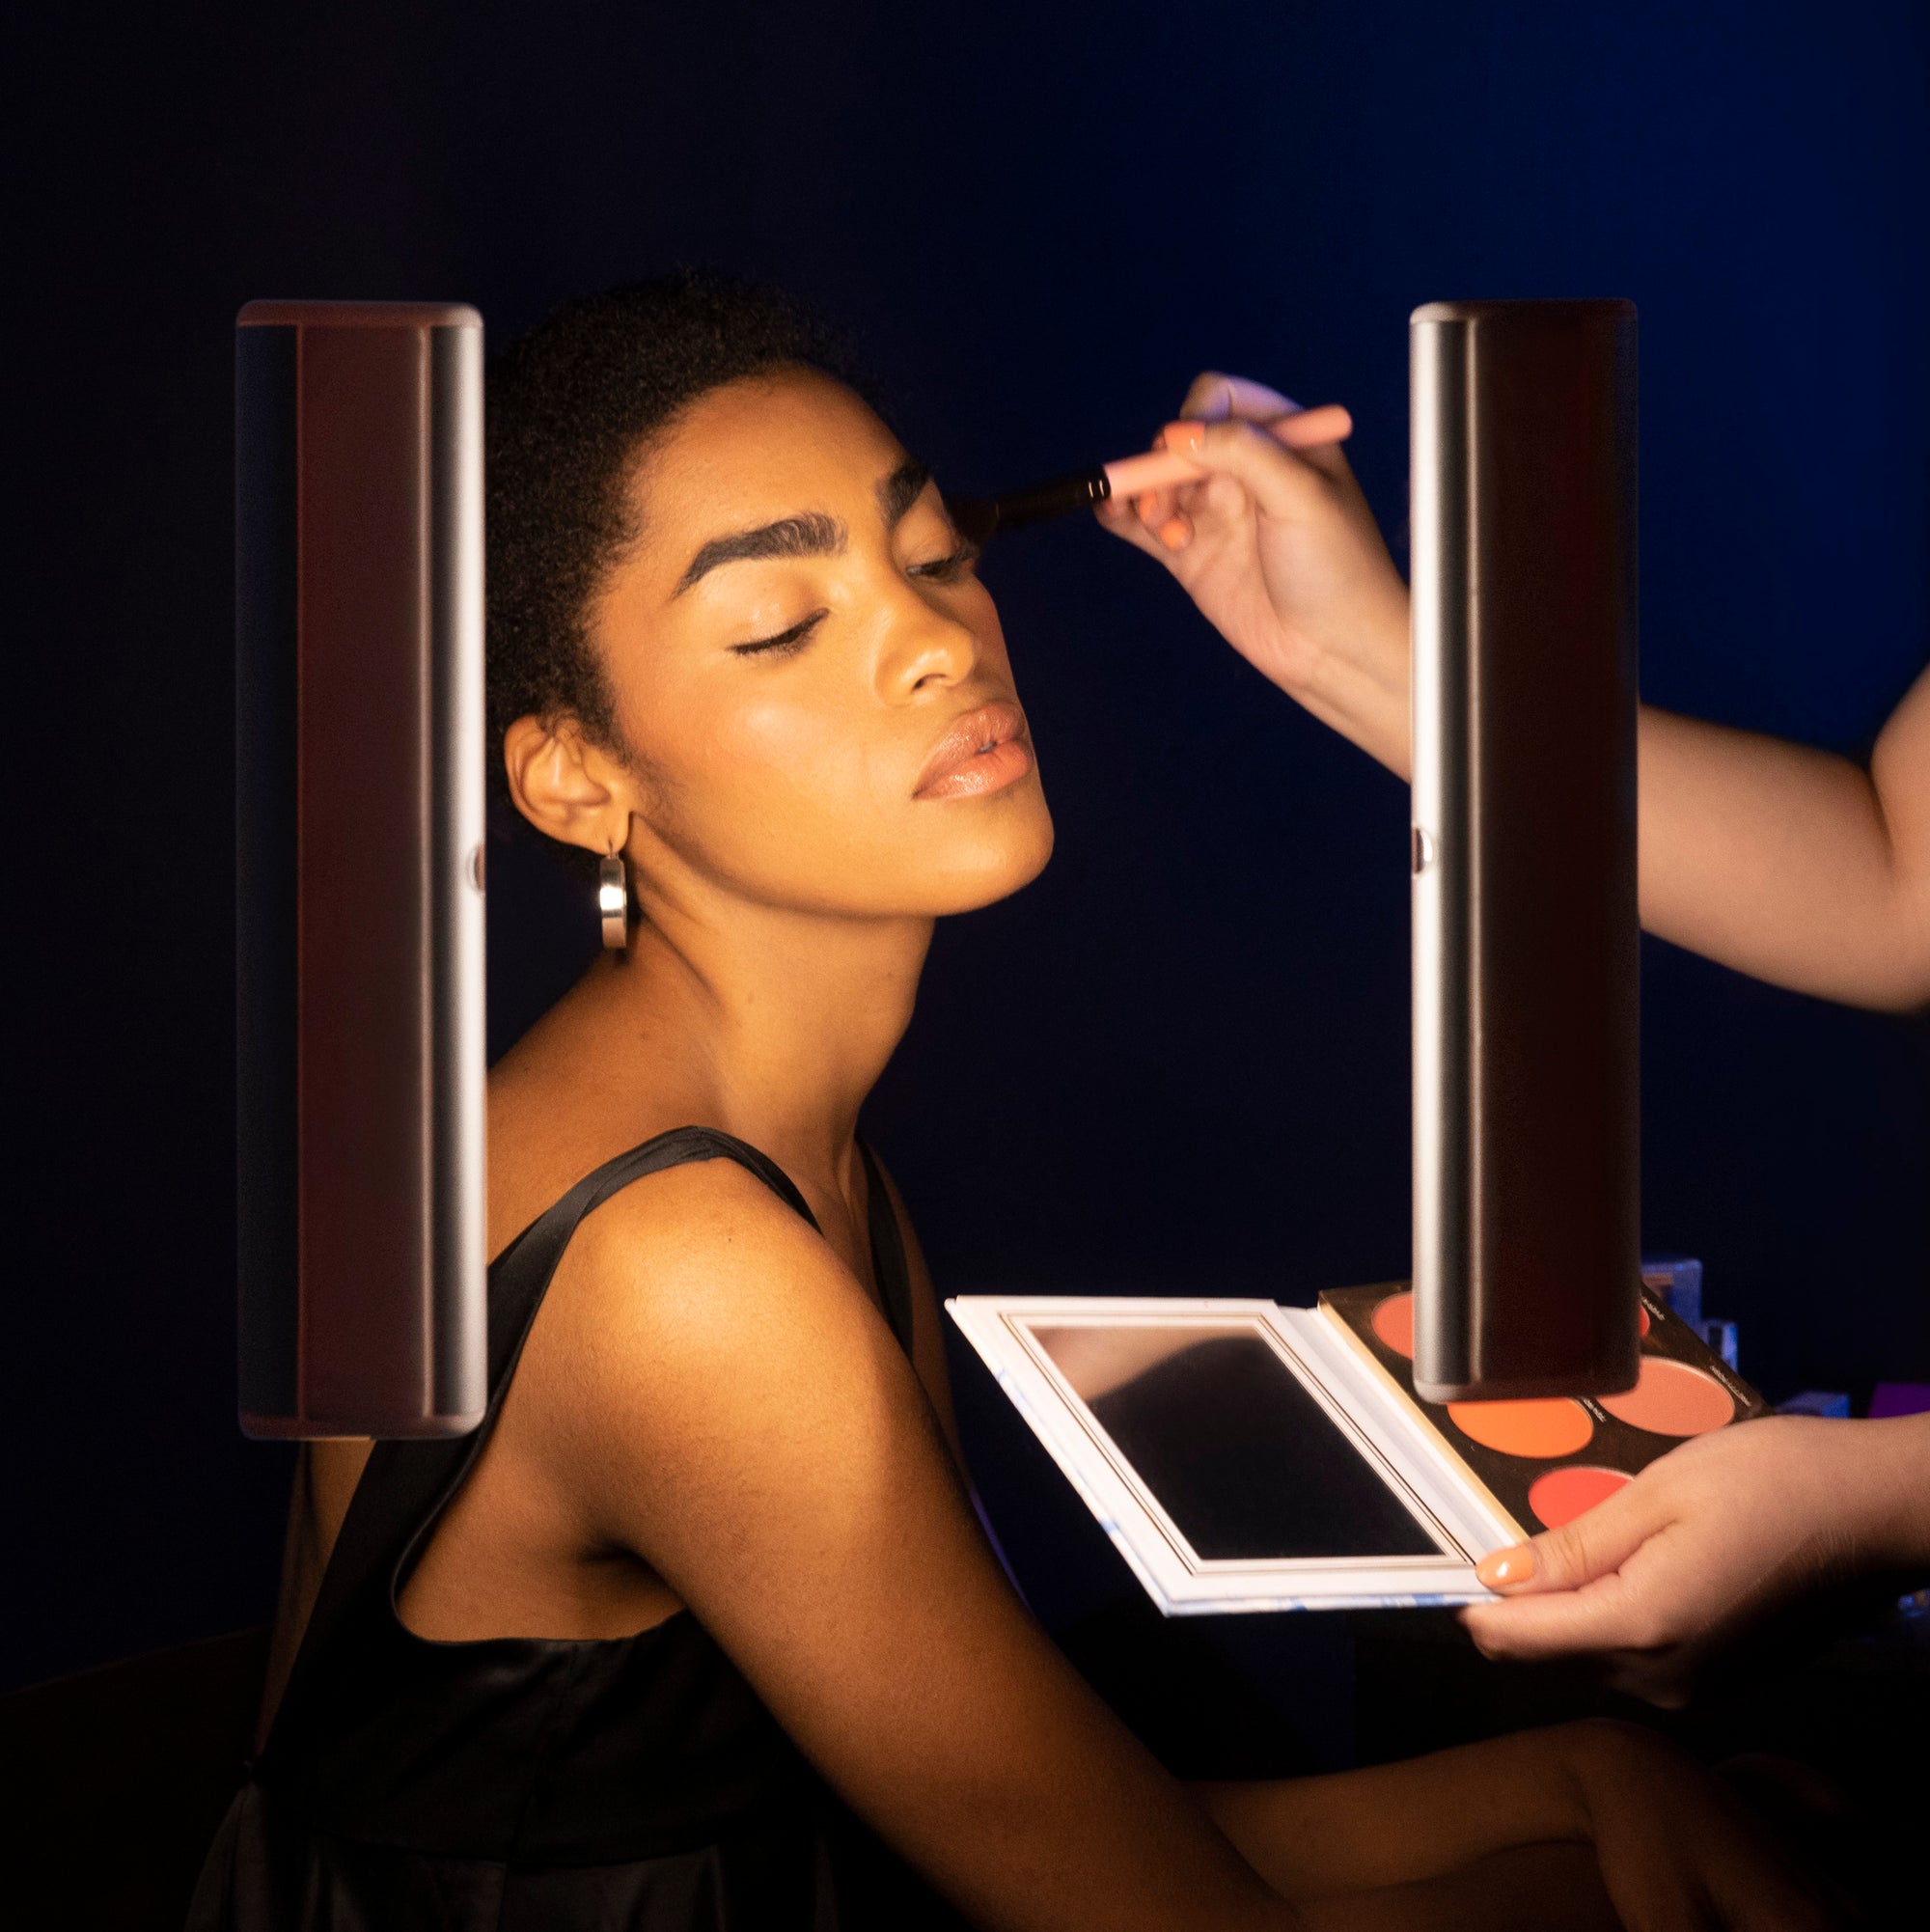 Adhesive LED Light Bar for Bathroom, Vanity, or Bedroom - Cosmic Twins, perfect for your makeup routine, your workspace and your beauty content.